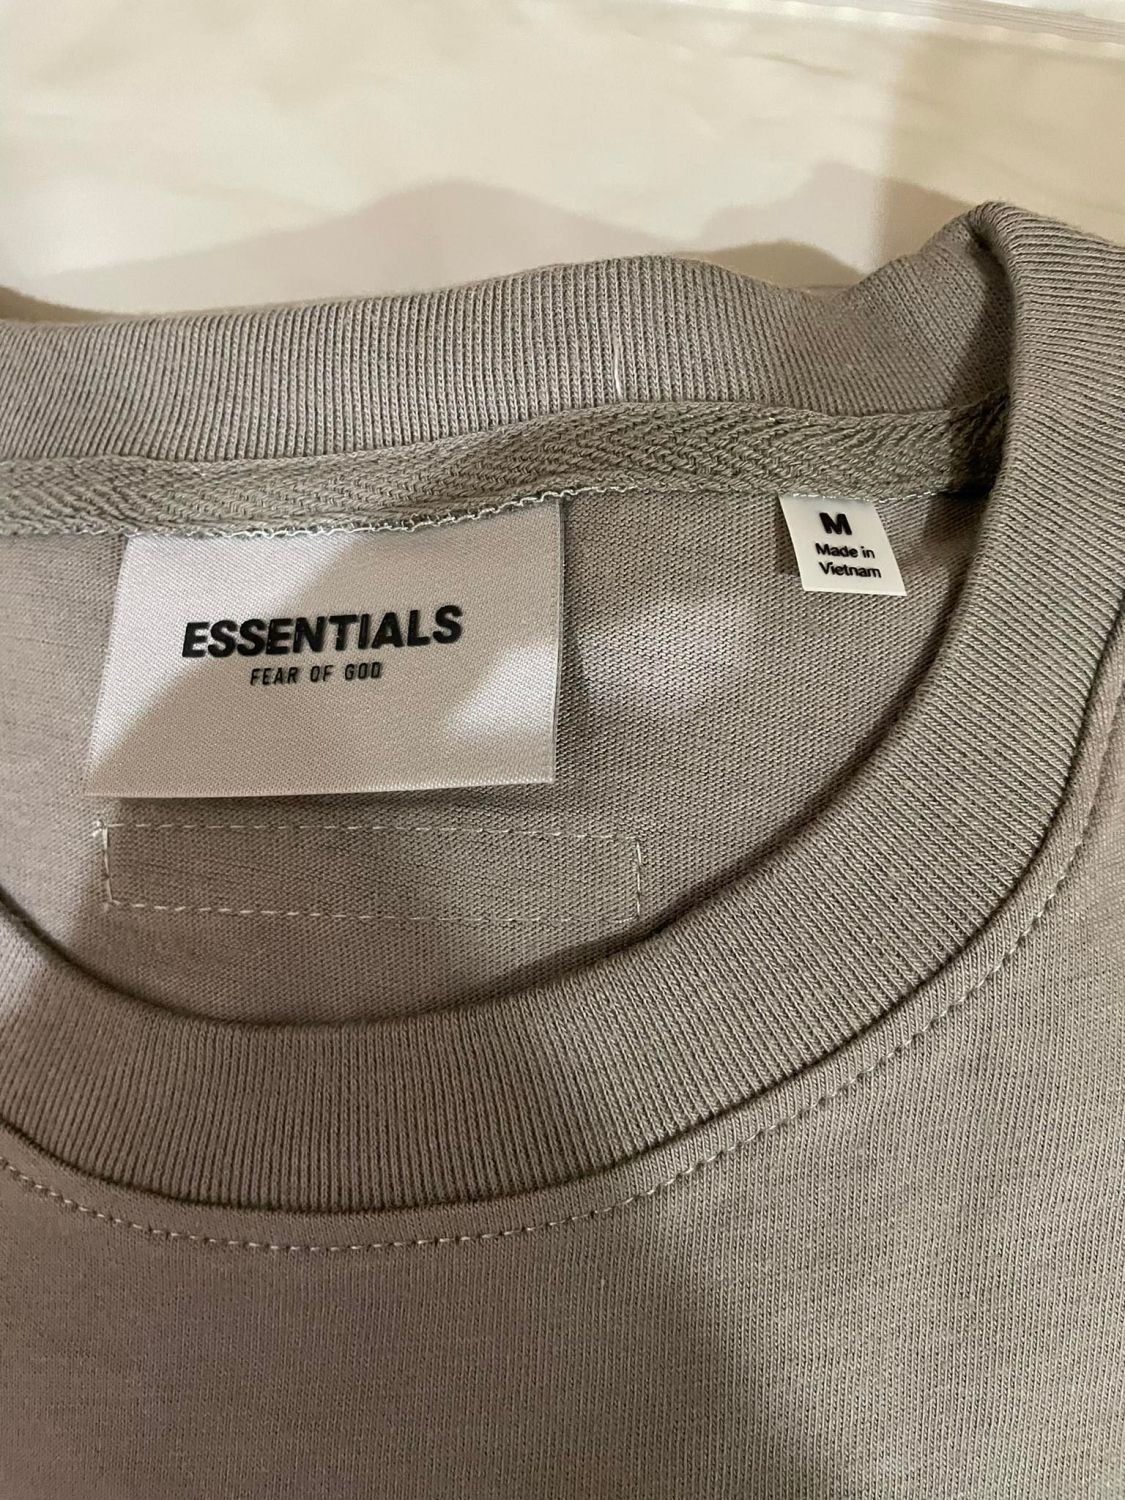 11767 - Fear Of God Ss20 Essentials Cement Tee | Item Details - AfterMarket